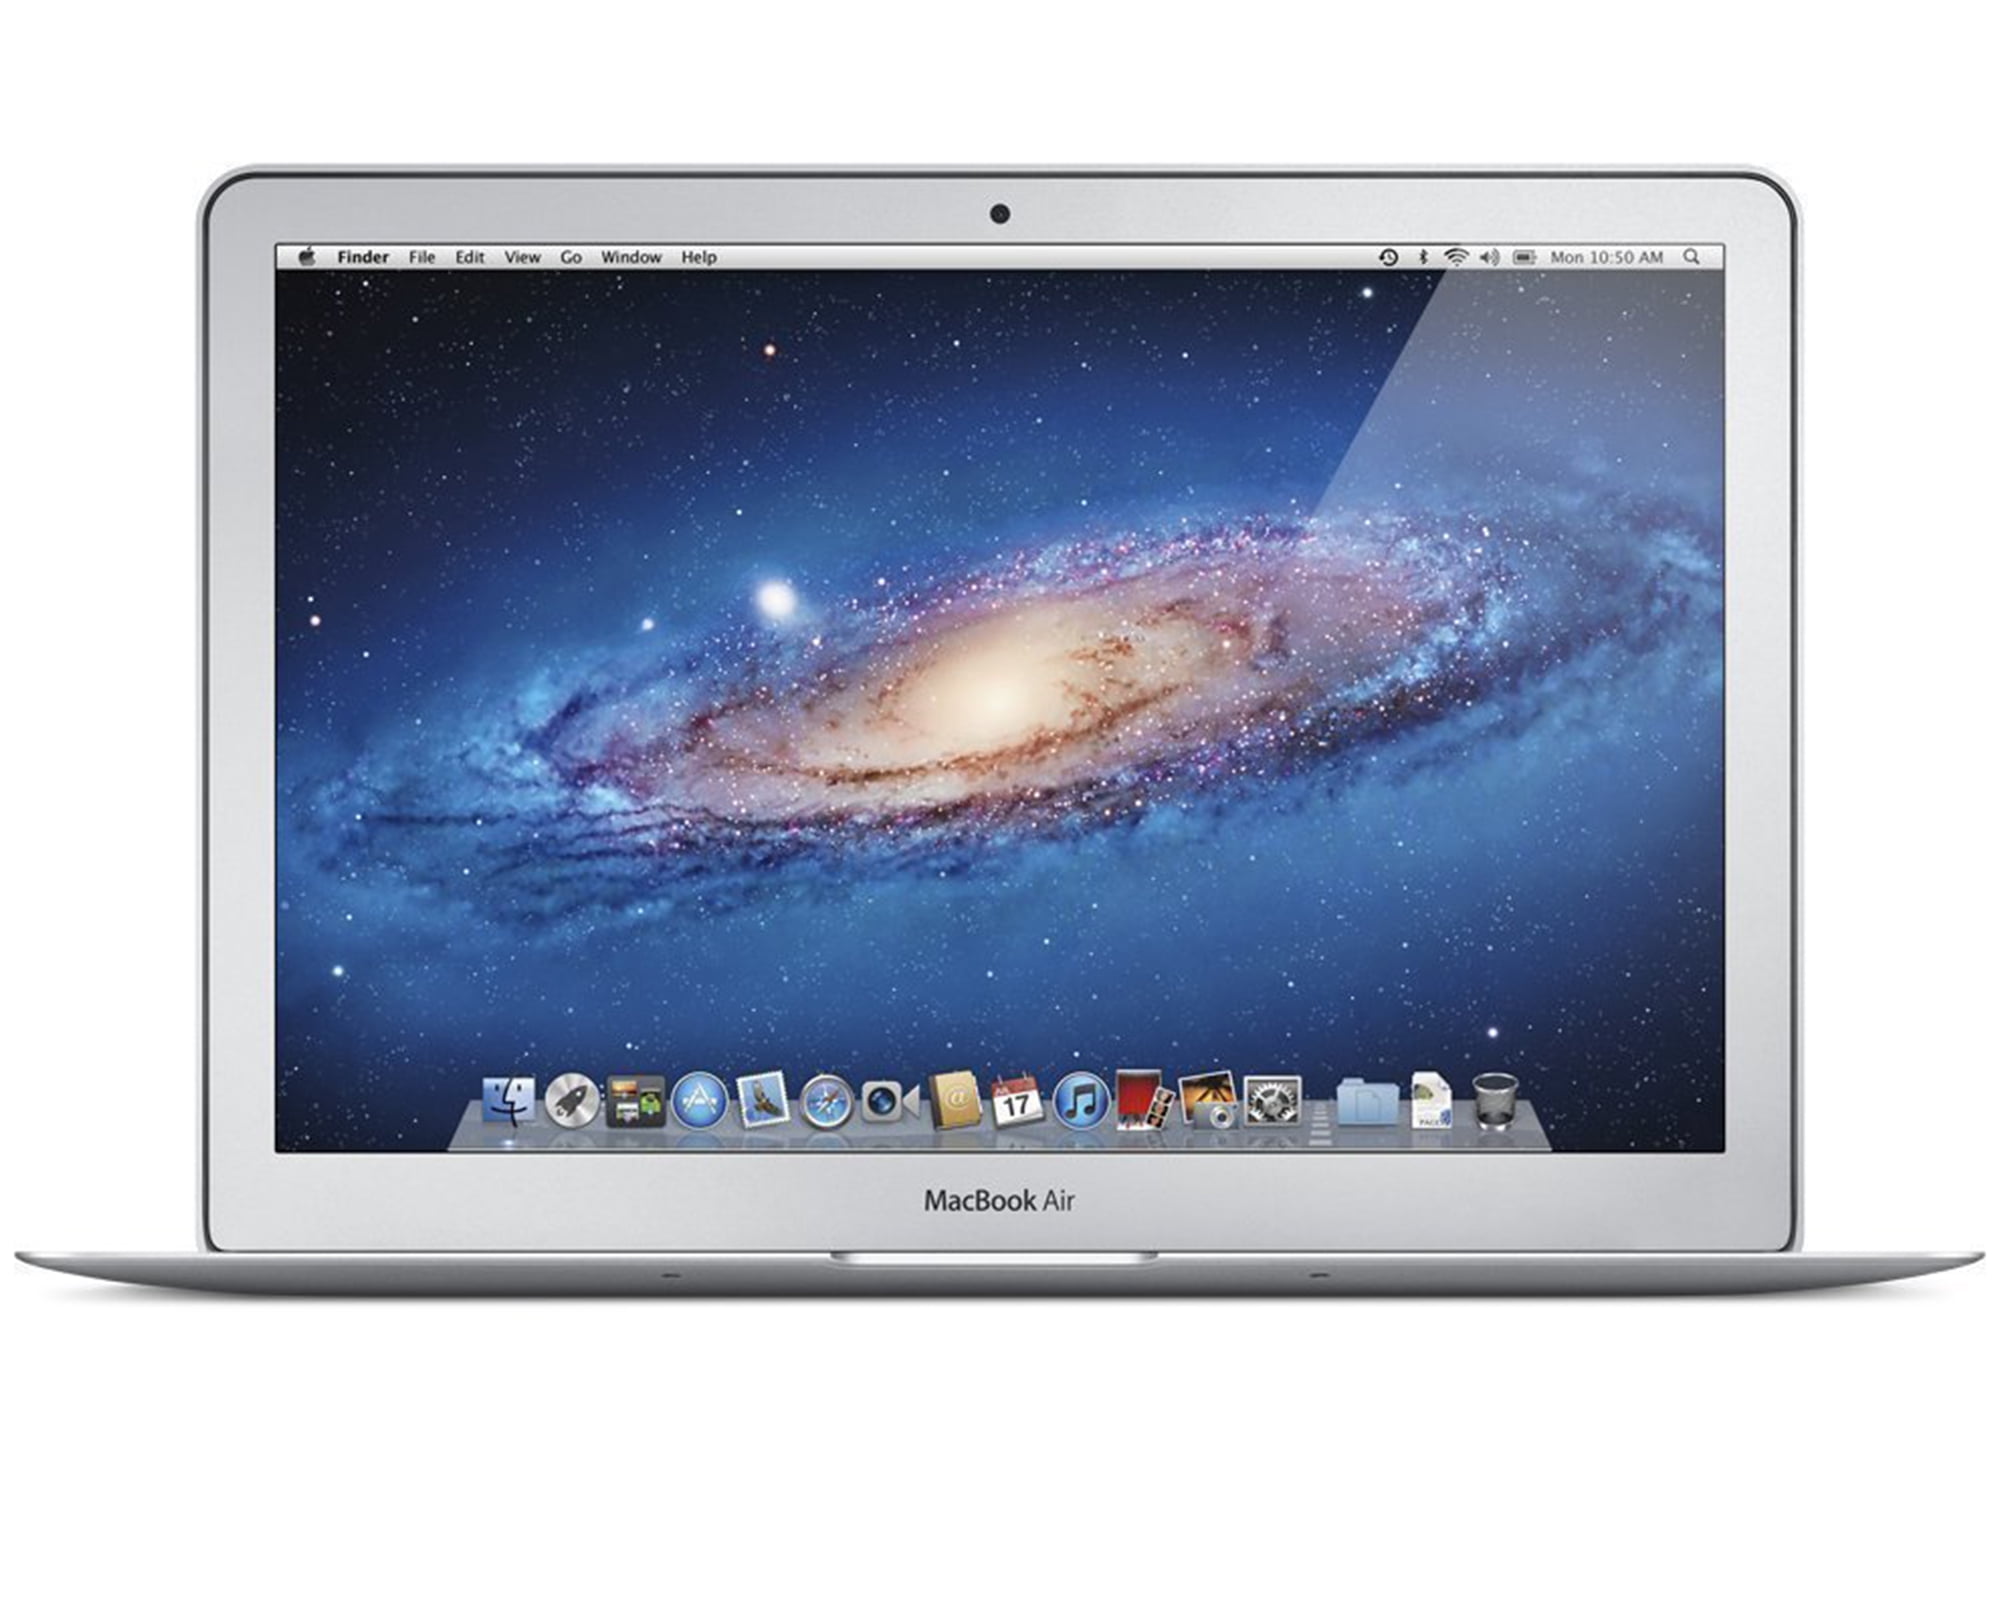 Restored Apple 13.3-inch MacBook Air MD760LL/A Laptop, (Intel Core i5  Dual-Core 1.3GHz up to 2.6GHz, 4GB RAM, Mac OS, 128GB SSD) - Silver 